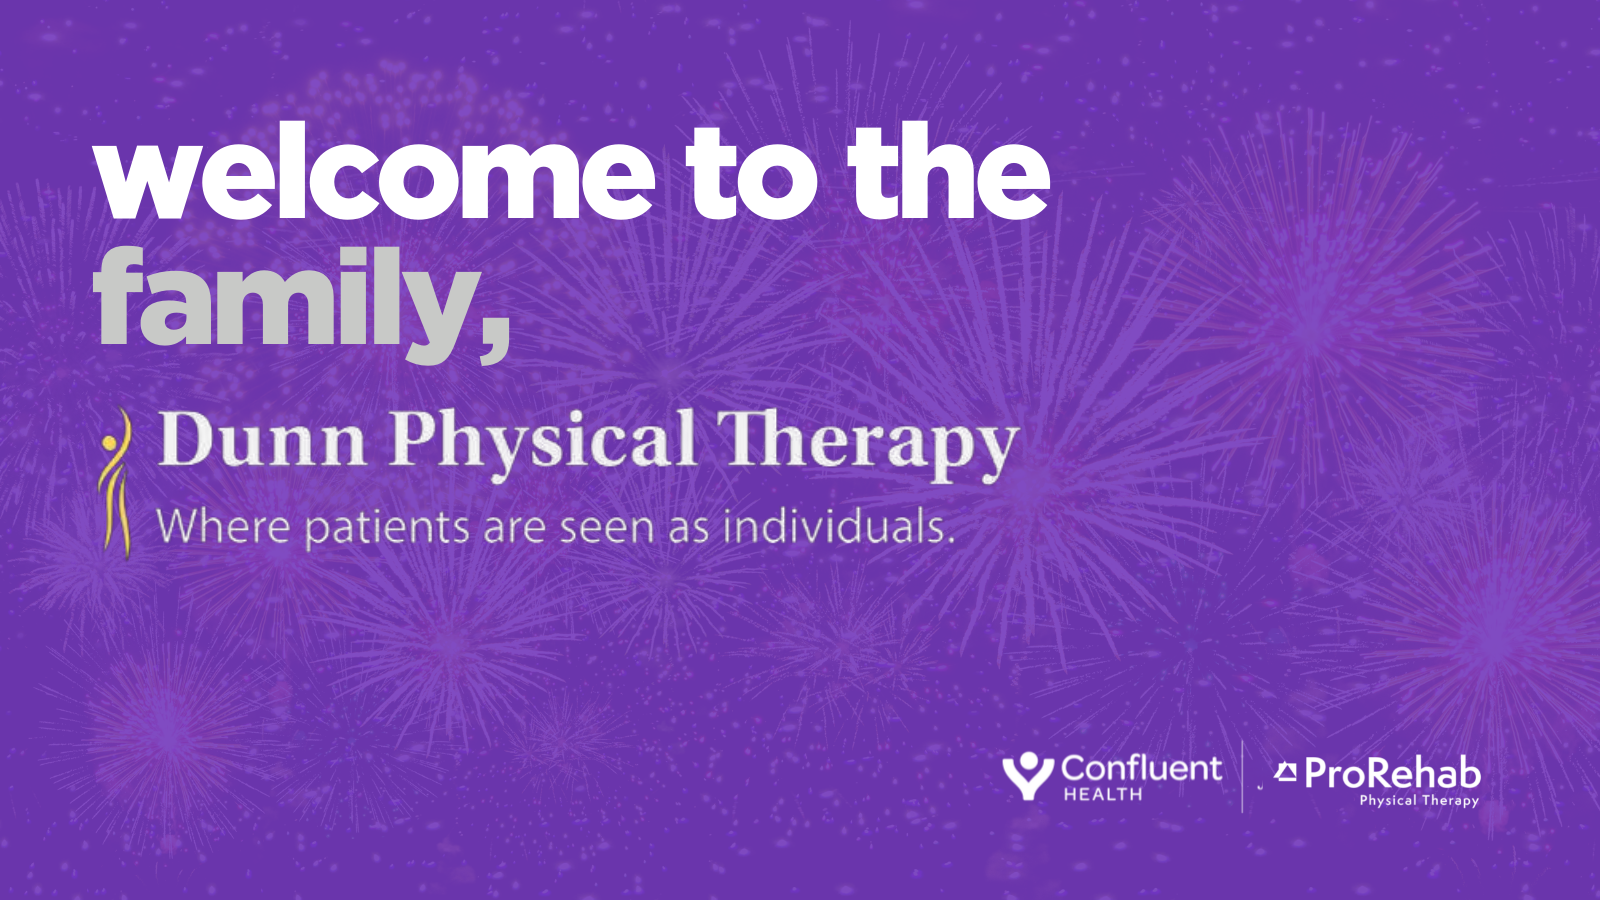 Welcome to the Family Dunn Physical Therapy